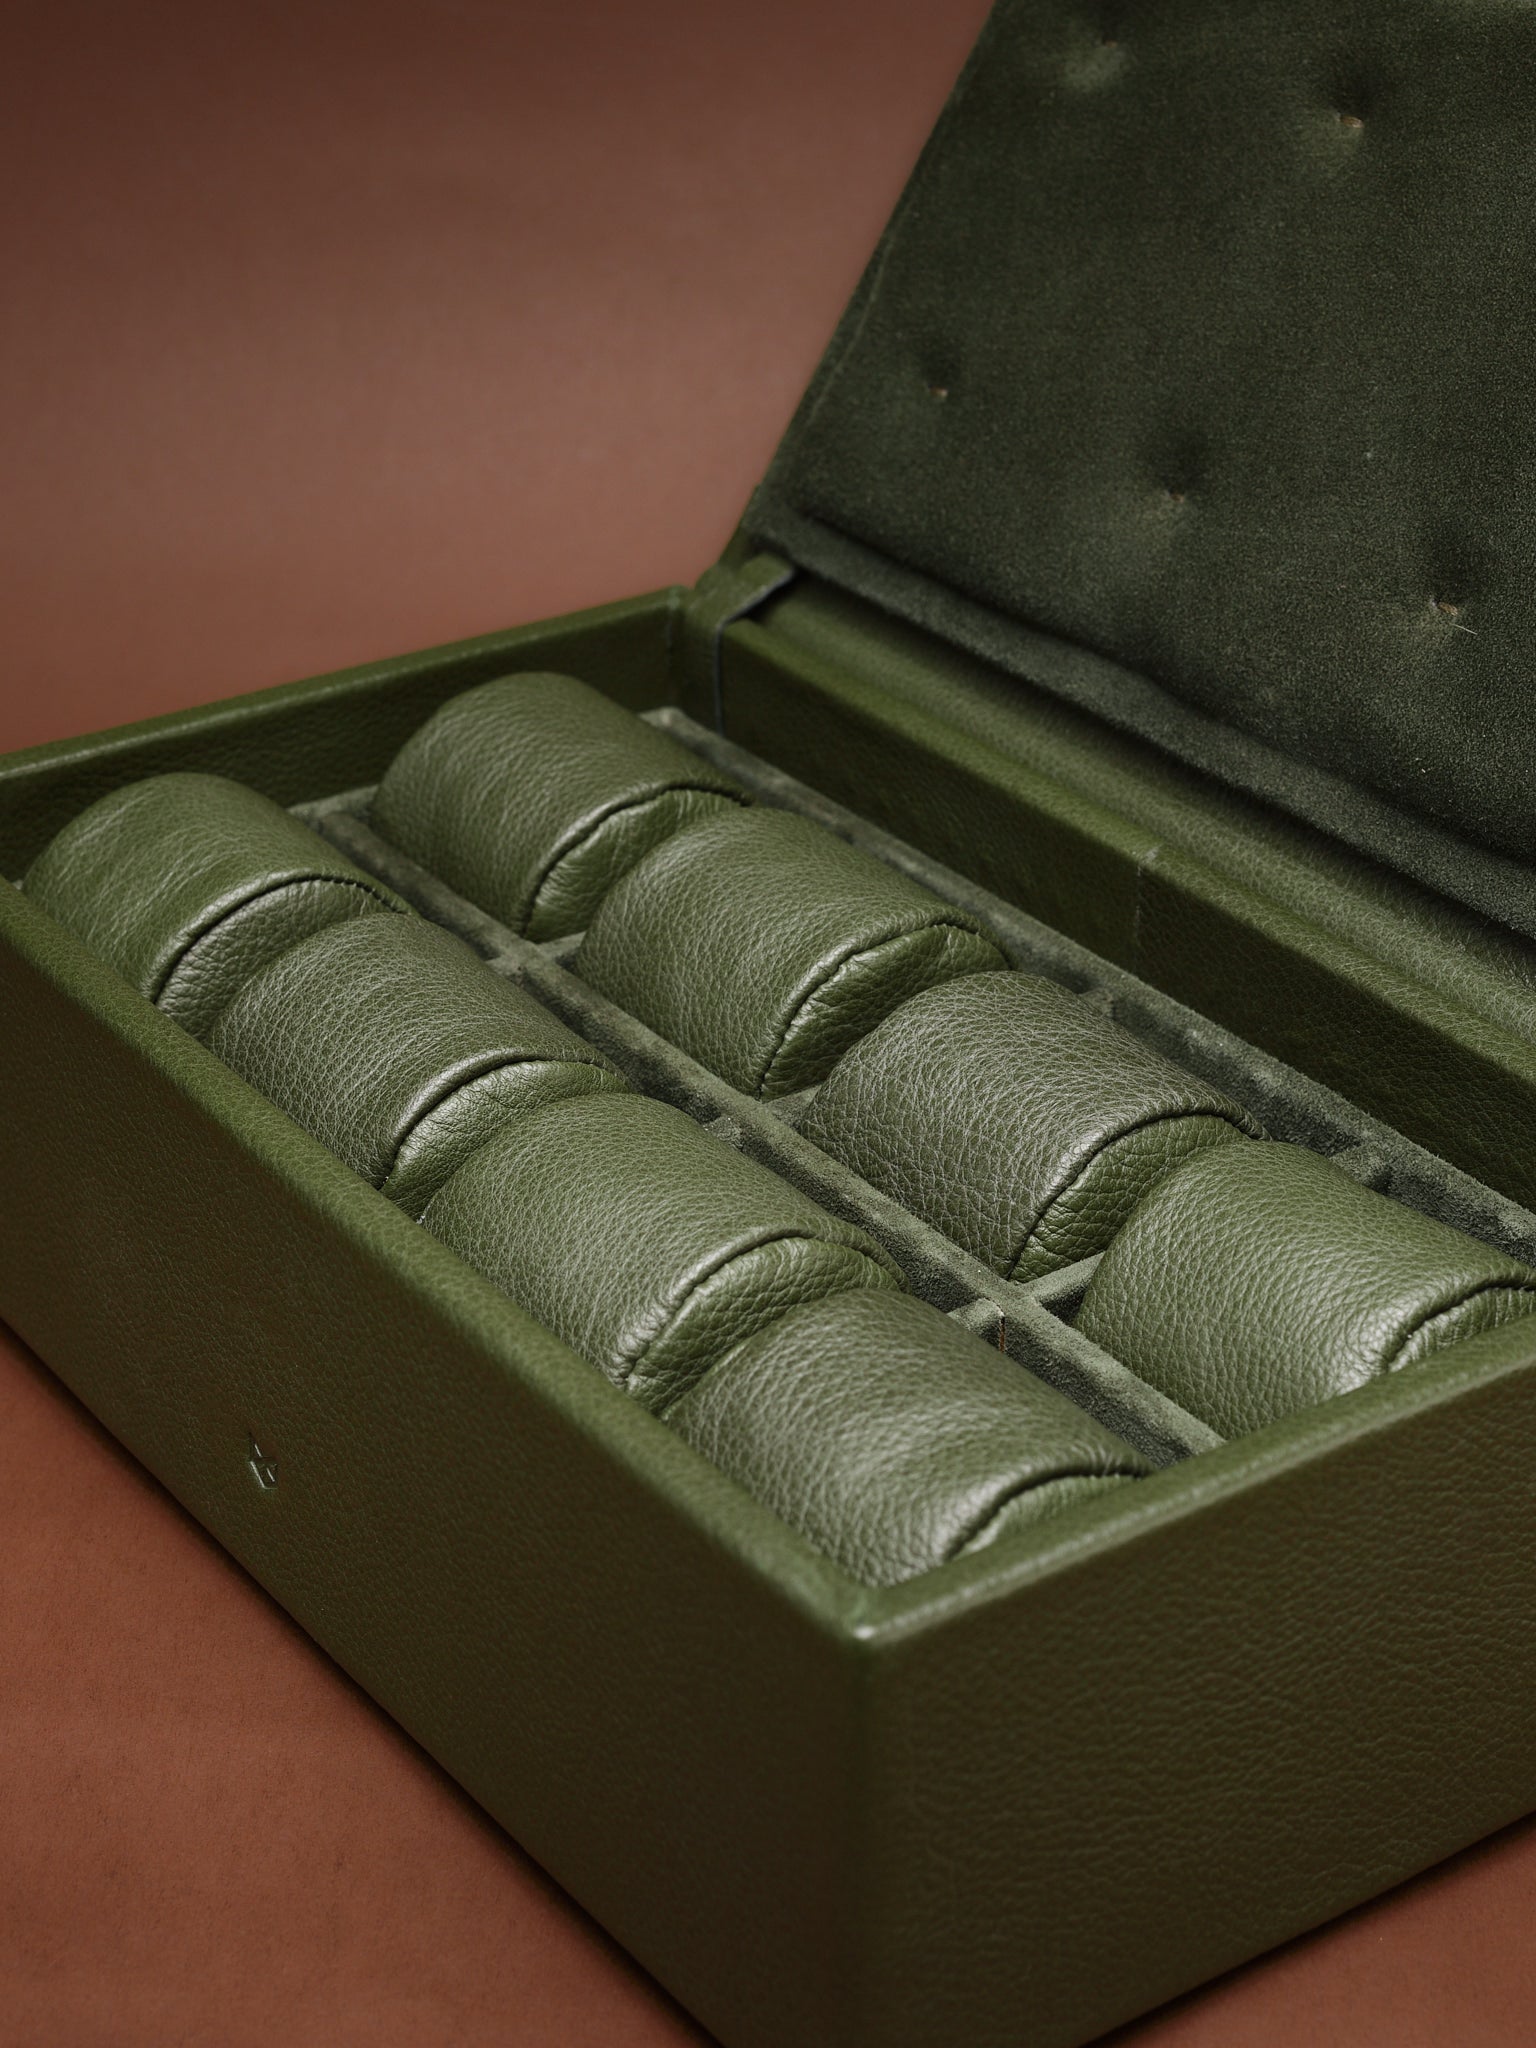 Leather Watch Individual Cushions. Luxury Watch Box Green by Capra Leather